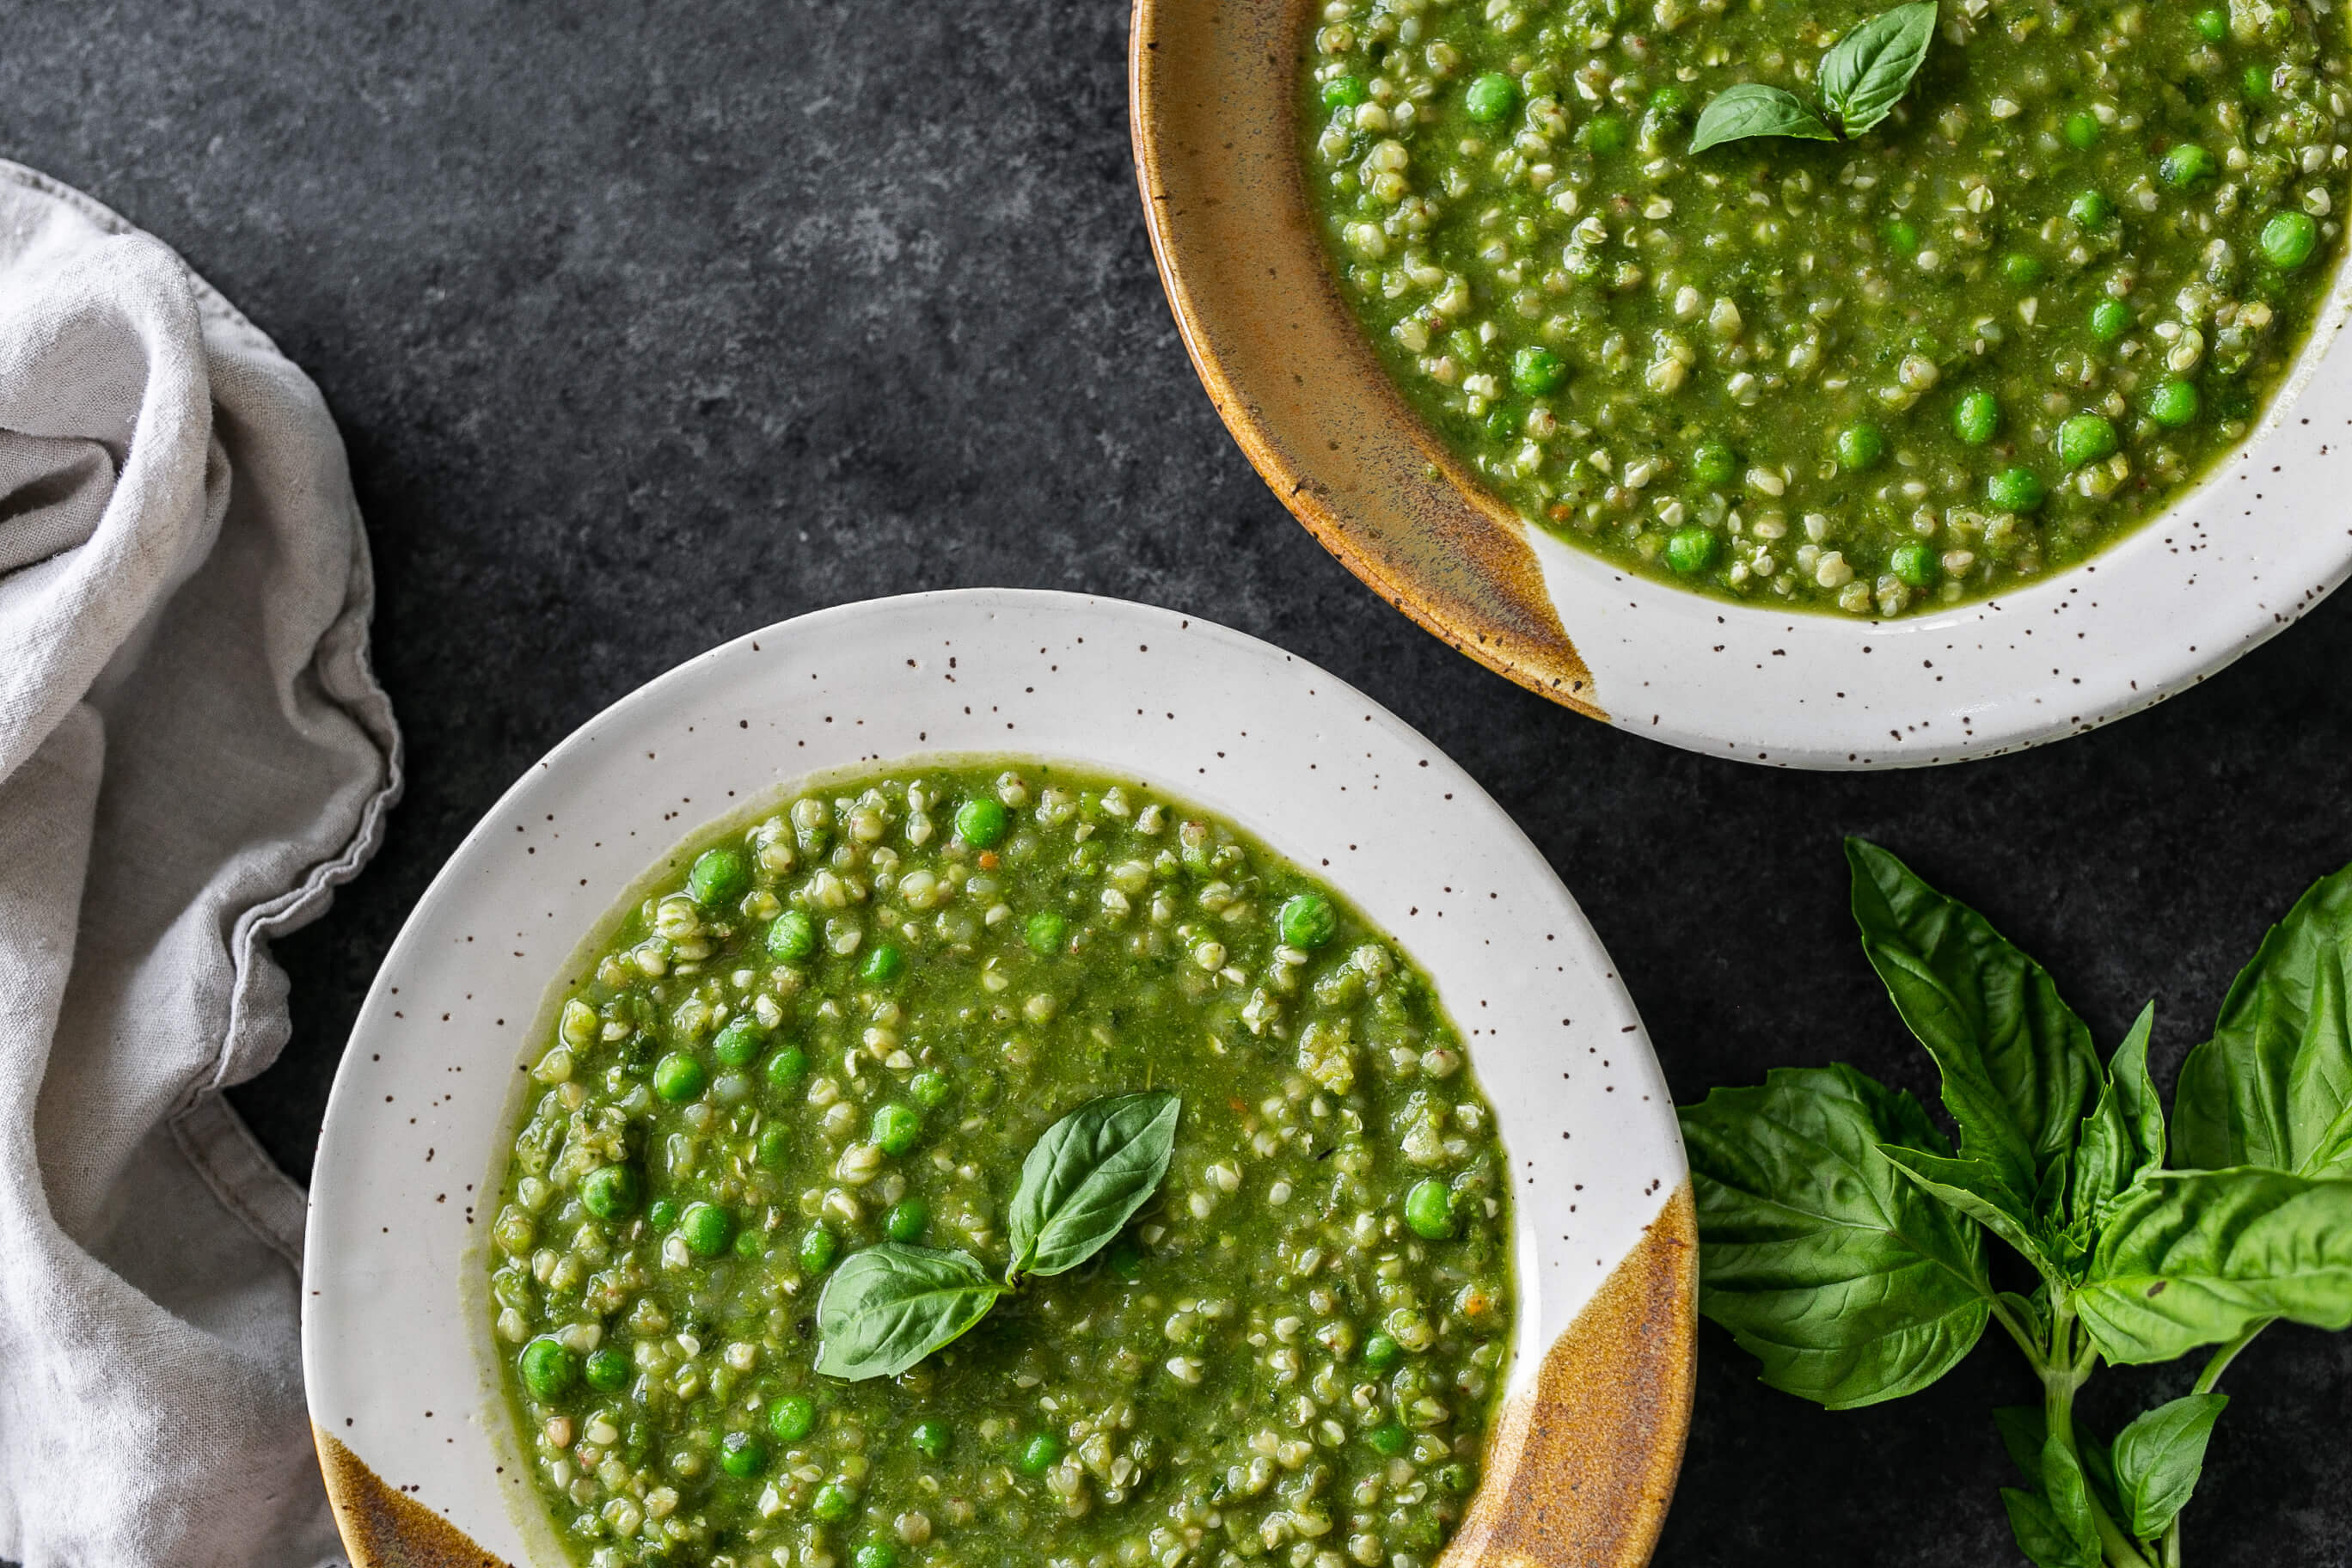 20 High Protein, Plant-Based Meals Your Clients Will Love: Pea & Basil Buckwheat Risotto